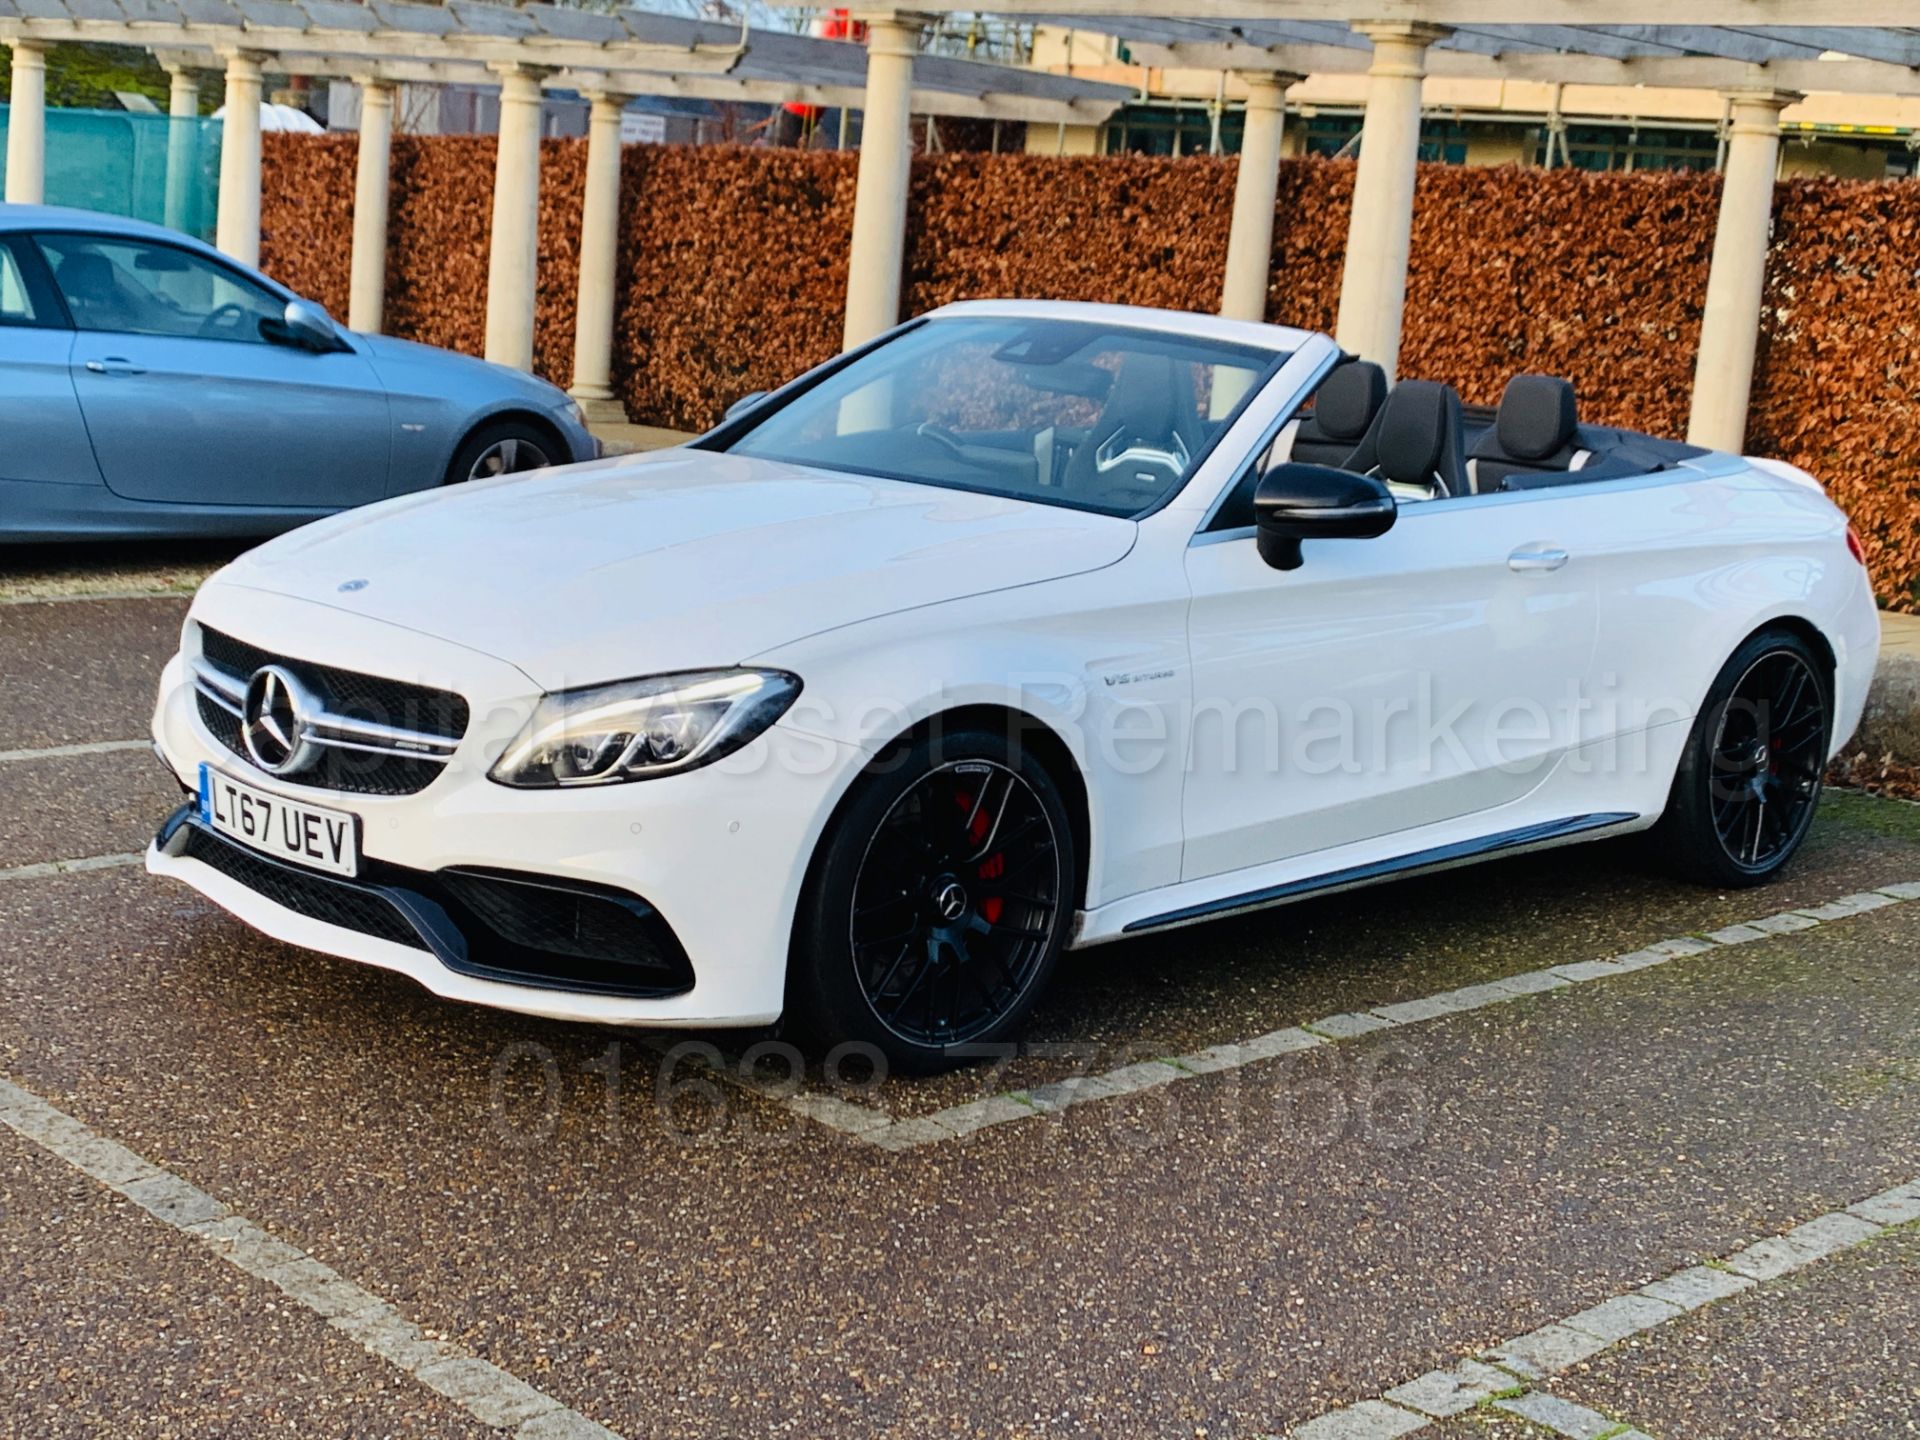 (On Sale) MERCEDES-BENZ AMG C63-S *CABRIOLET* (67 REG) '4.0 BI-TURBO -510 BHP - AUTO' *FULLY LOADED* - Image 13 of 79